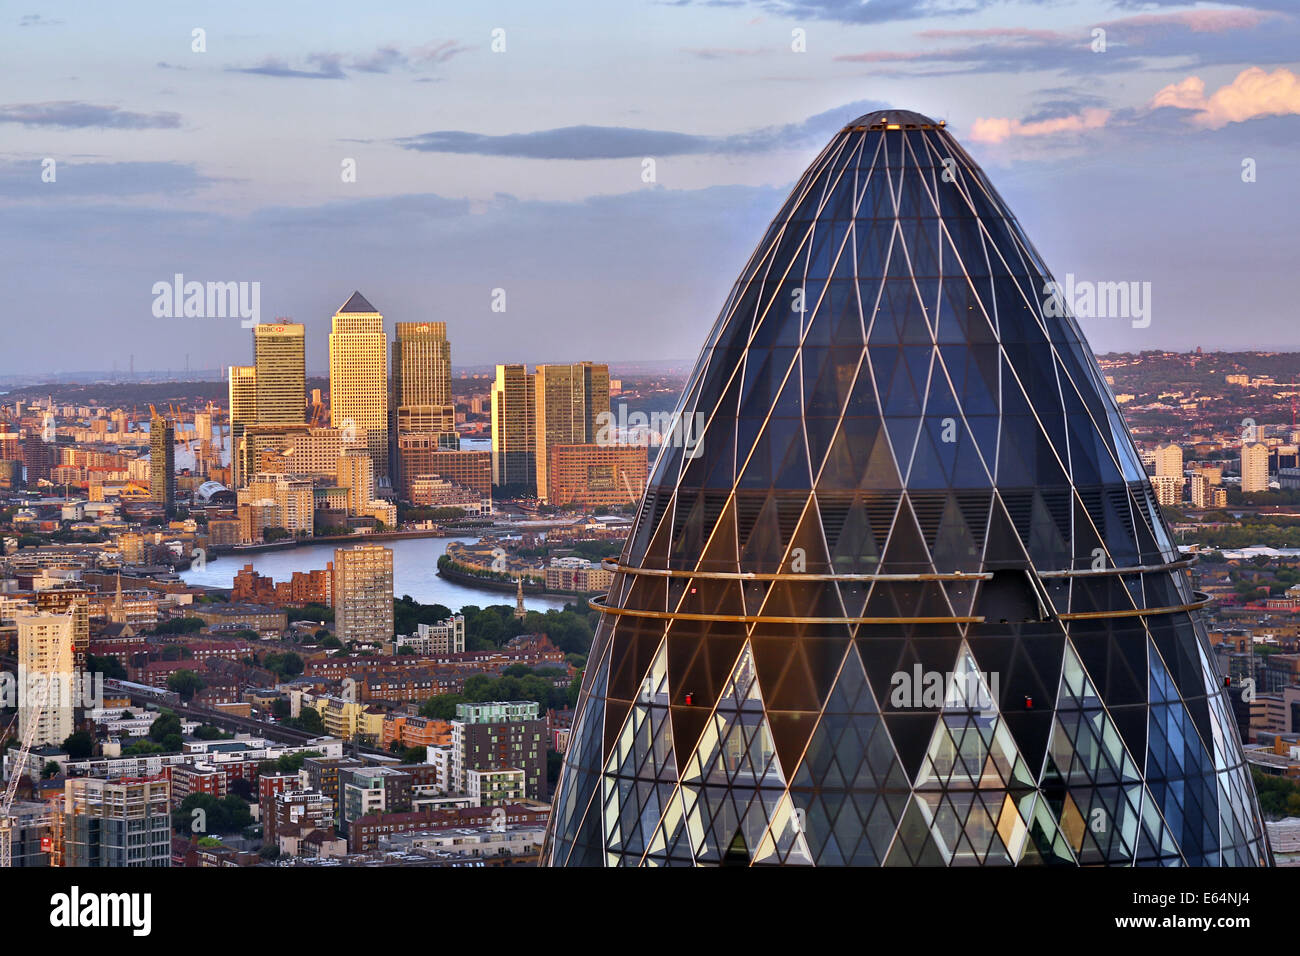 General view of buildings of the city skyline, Canary Wharf and the Gherkin, 30 St Mary Axe at dusk in London, England Stock Photo